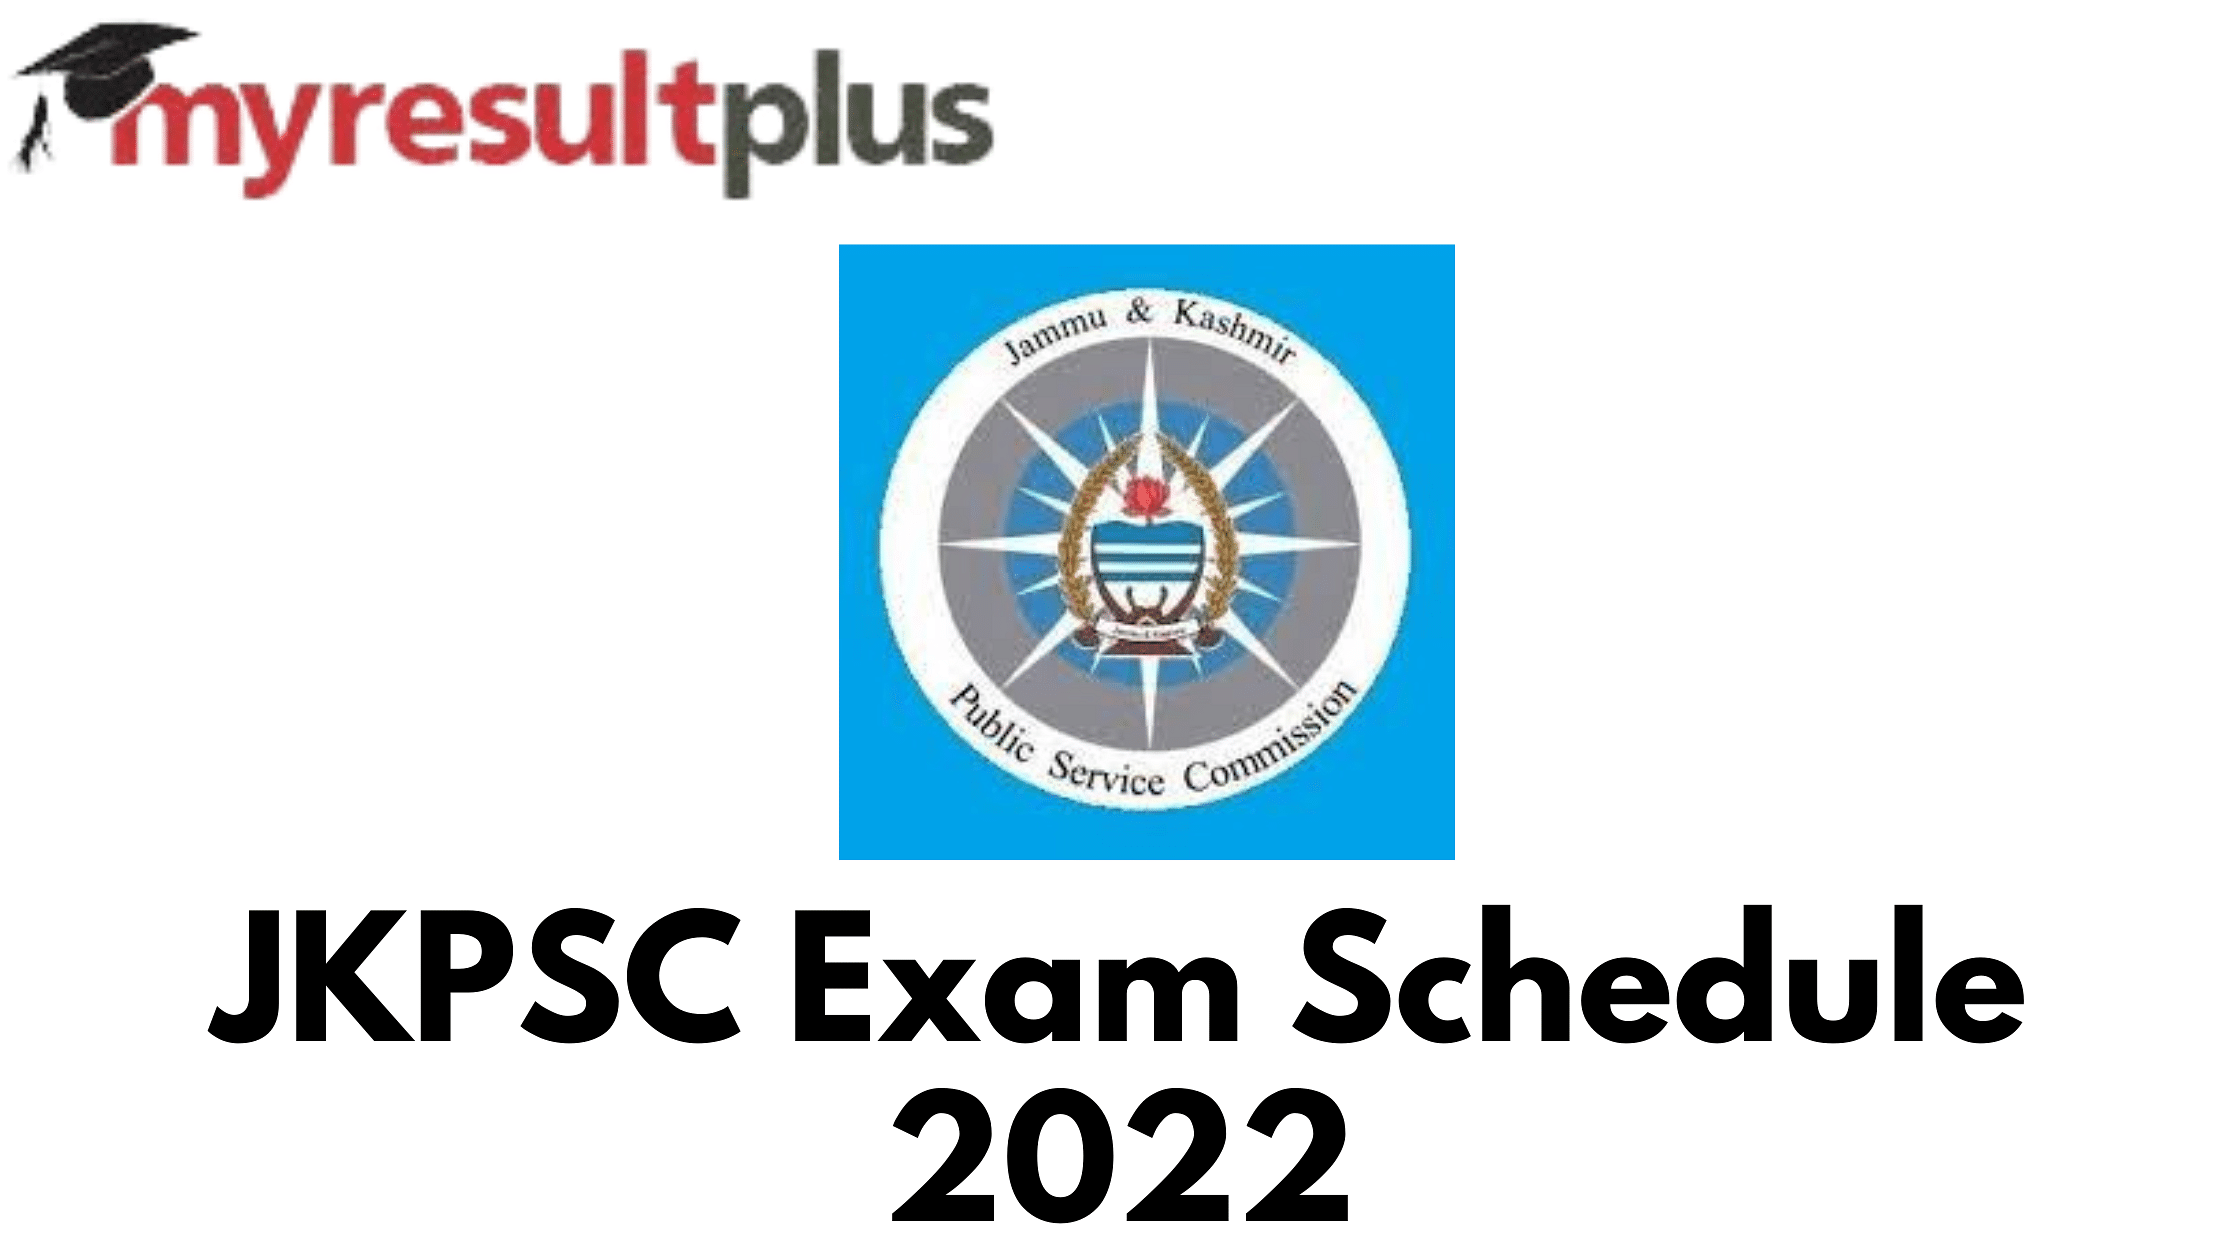 JKPSC Exam Schedule Out For November Exams, Complete Date Sheet Here